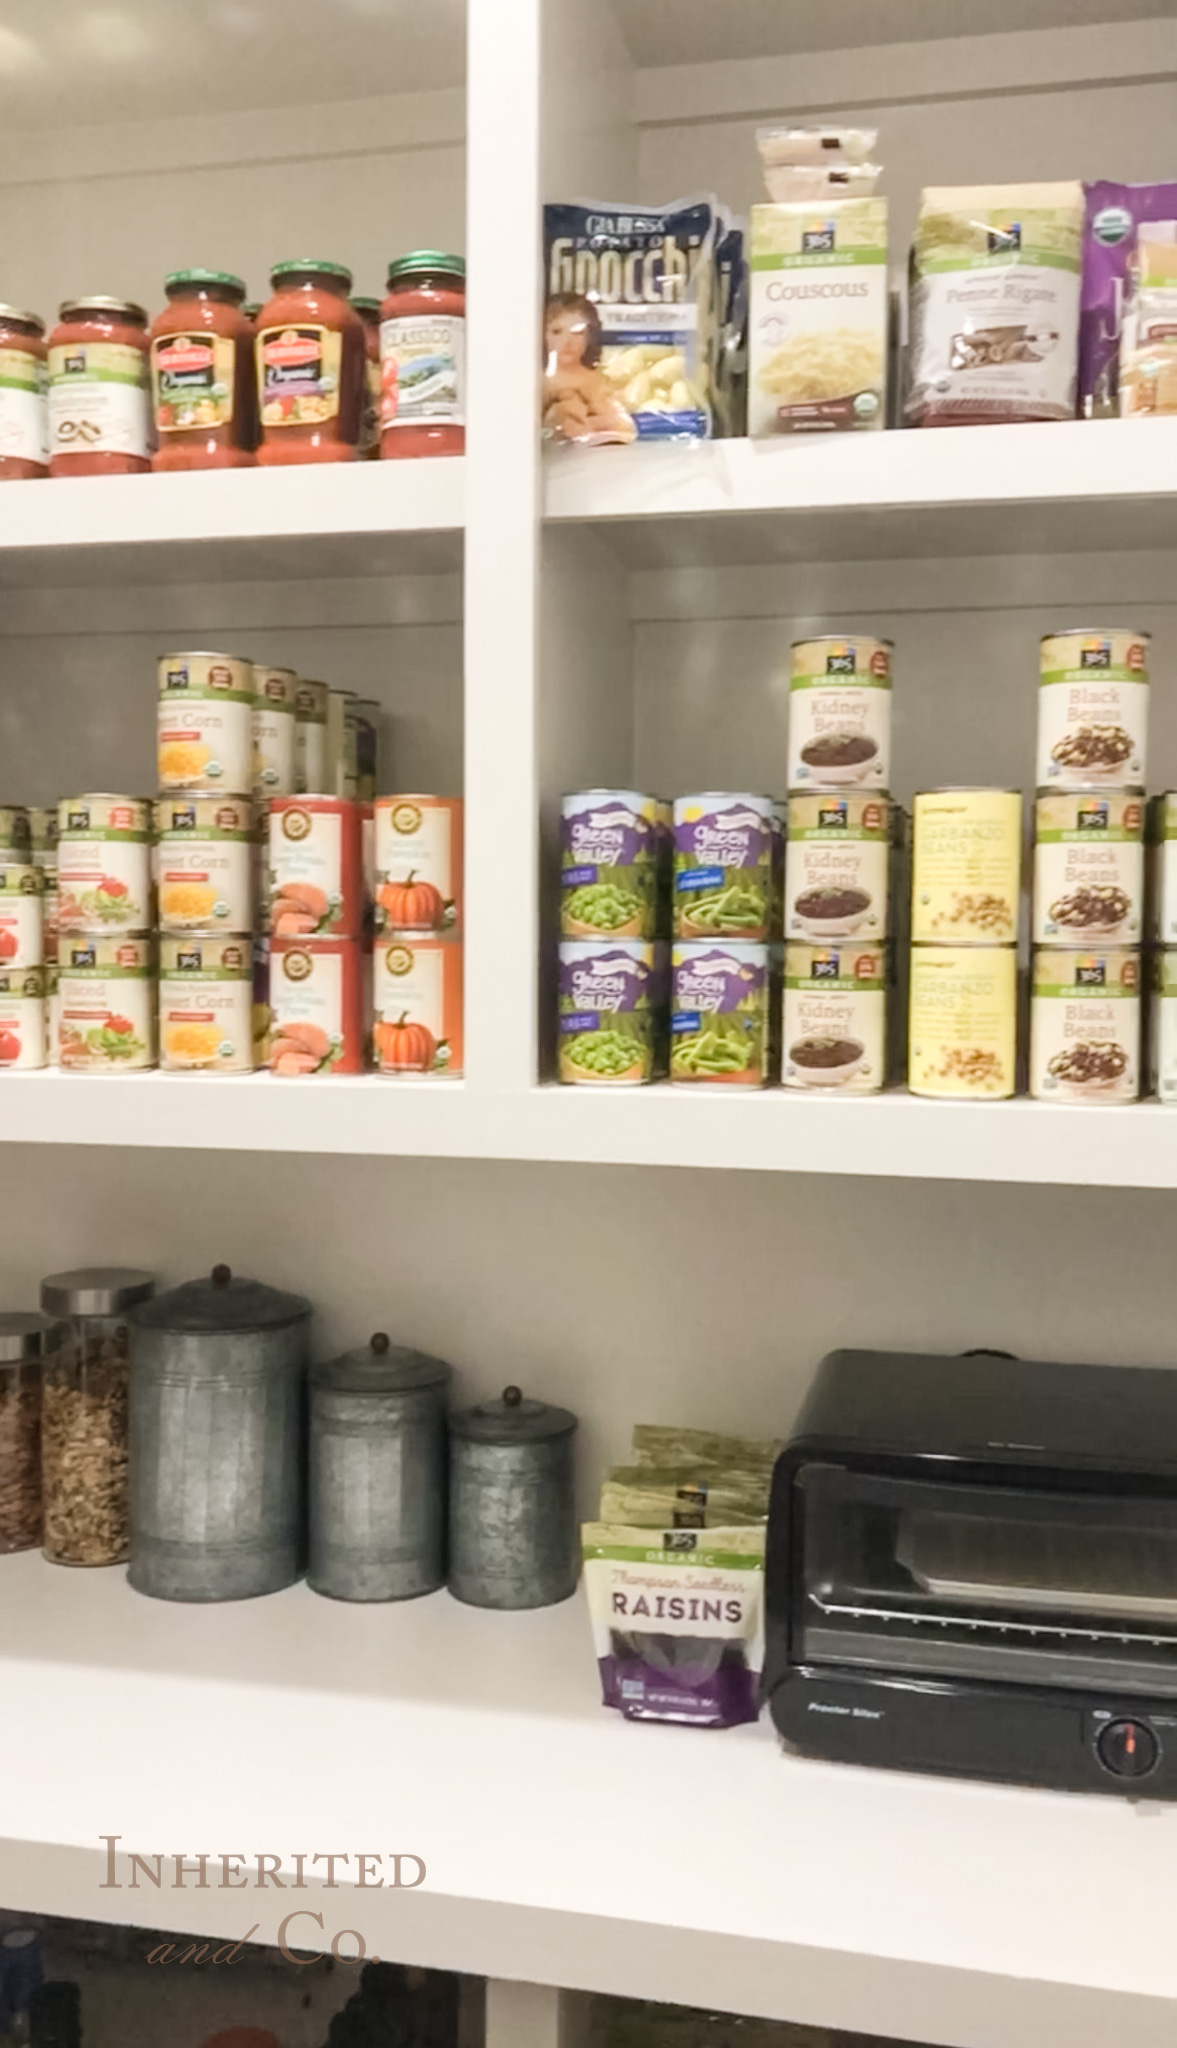 blurry photo of stocked pantry shelves